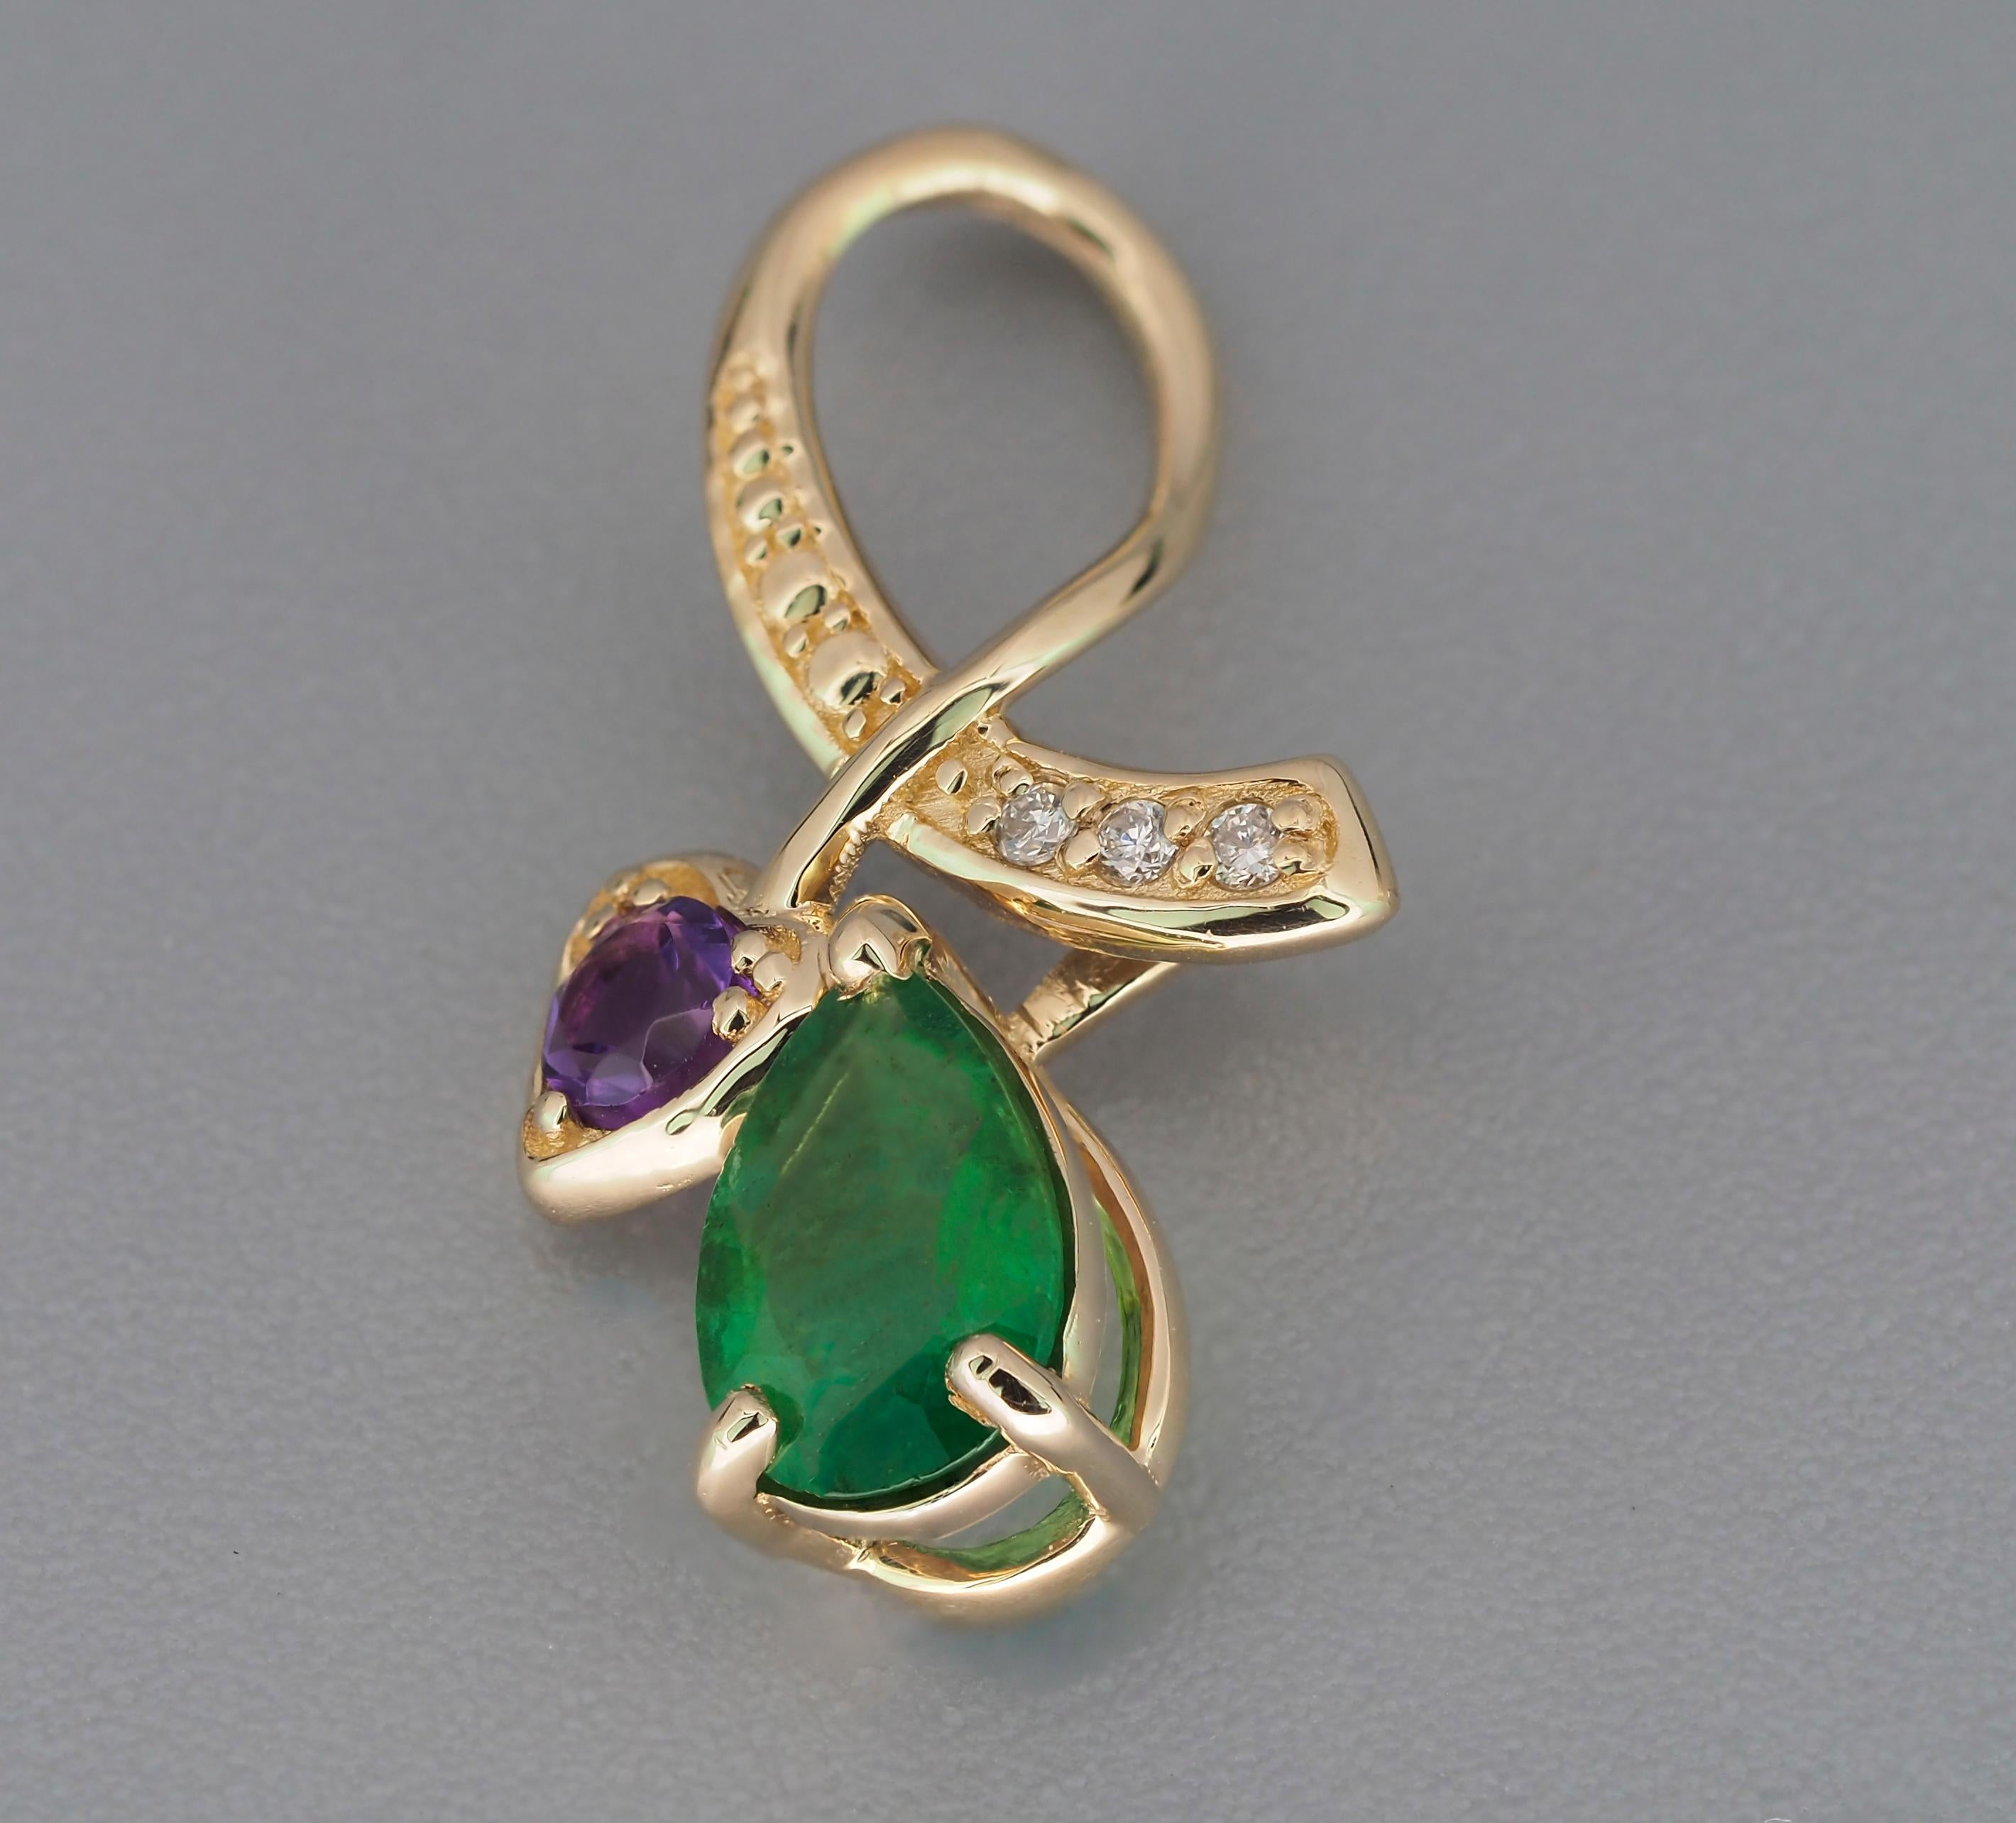 14 kt solid gold pendant with natural emerald, amethyst and diamonds.

Metal: 14k gold
Weight: 0.80 g.
Pendant size: 16.4 x 9.5 mm.
Central stone: Natural emerald
Cut: Pear
Weight: approx 0.70 ct.
Color: Green
Clarity: Transparent with